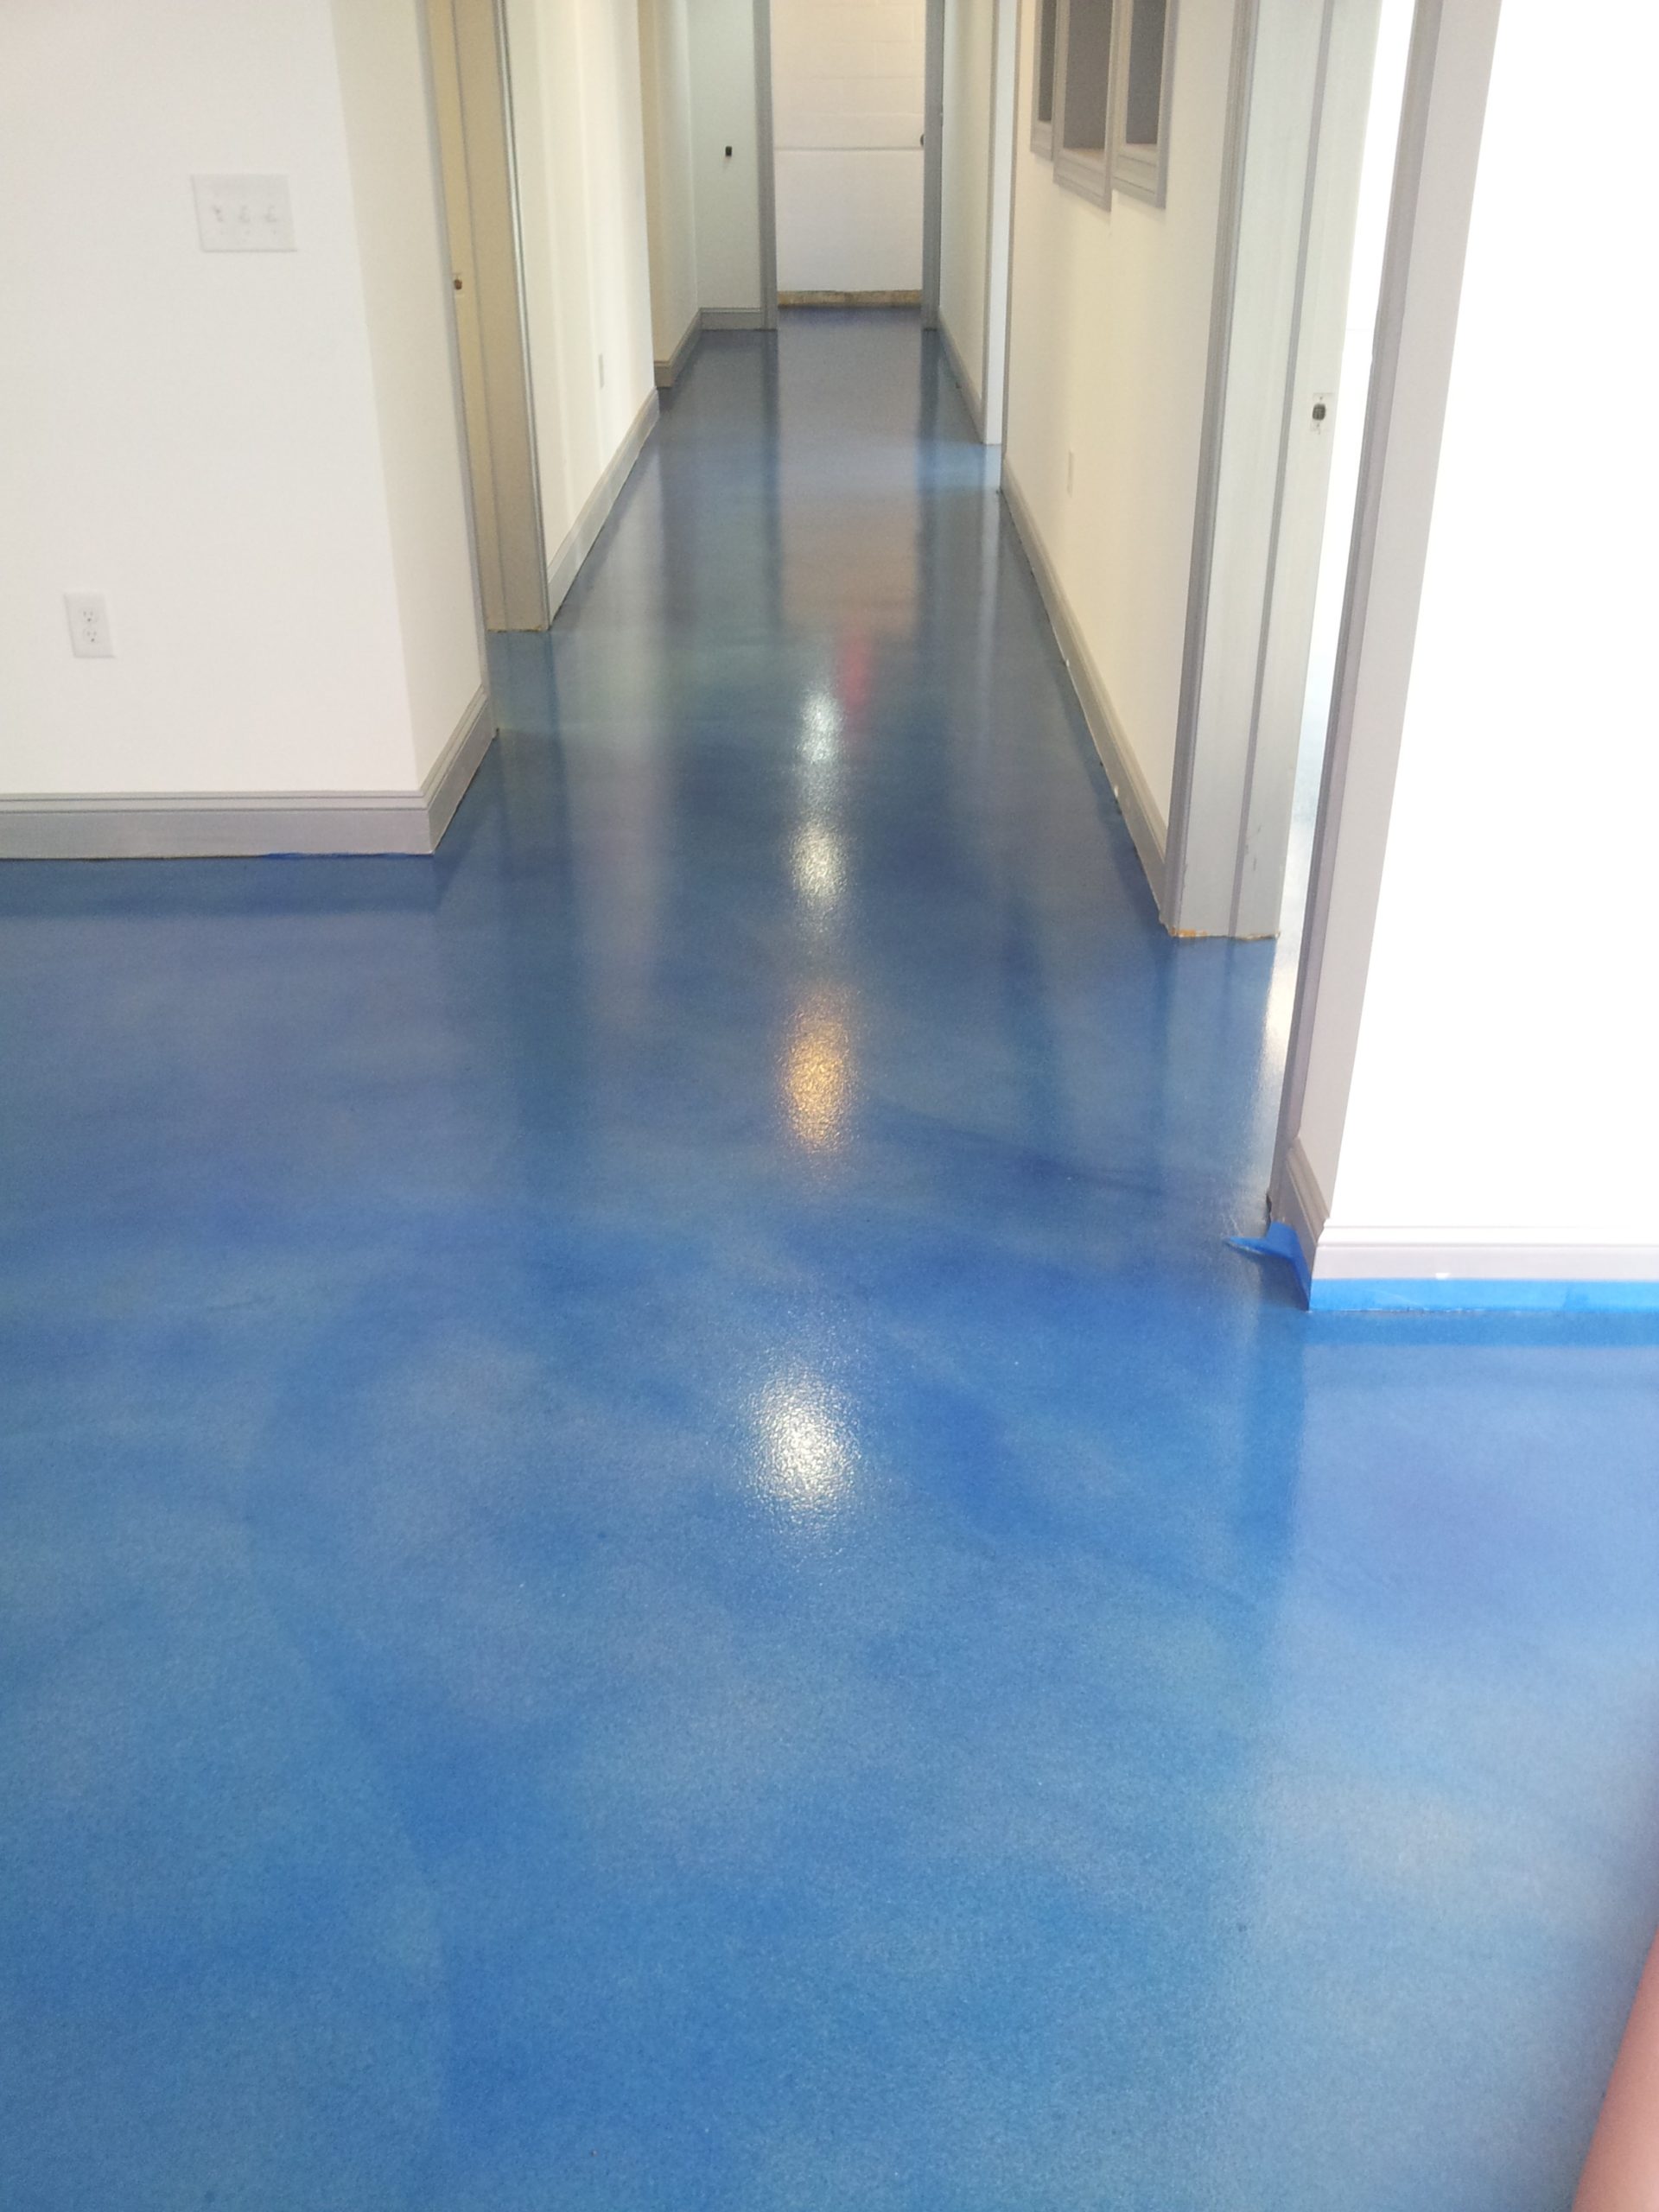 Poured Cement Floor Dye and Seal Poured cement flooring at Cressi showroom in Saddle Brook NJ | Duraamen Engineered Products Inc